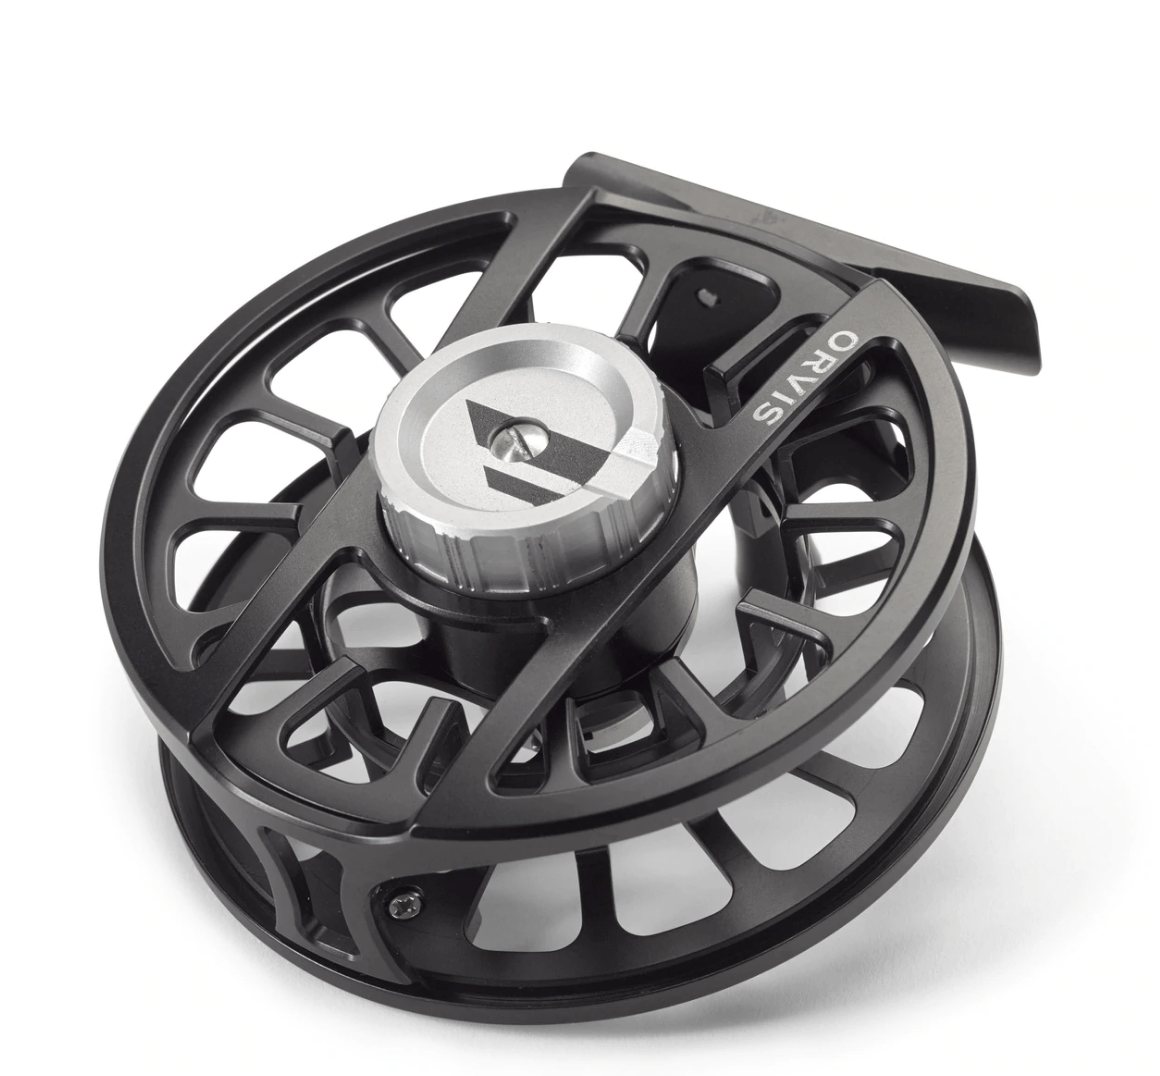 Classic saltwater fly reel, Classic Fly Reels